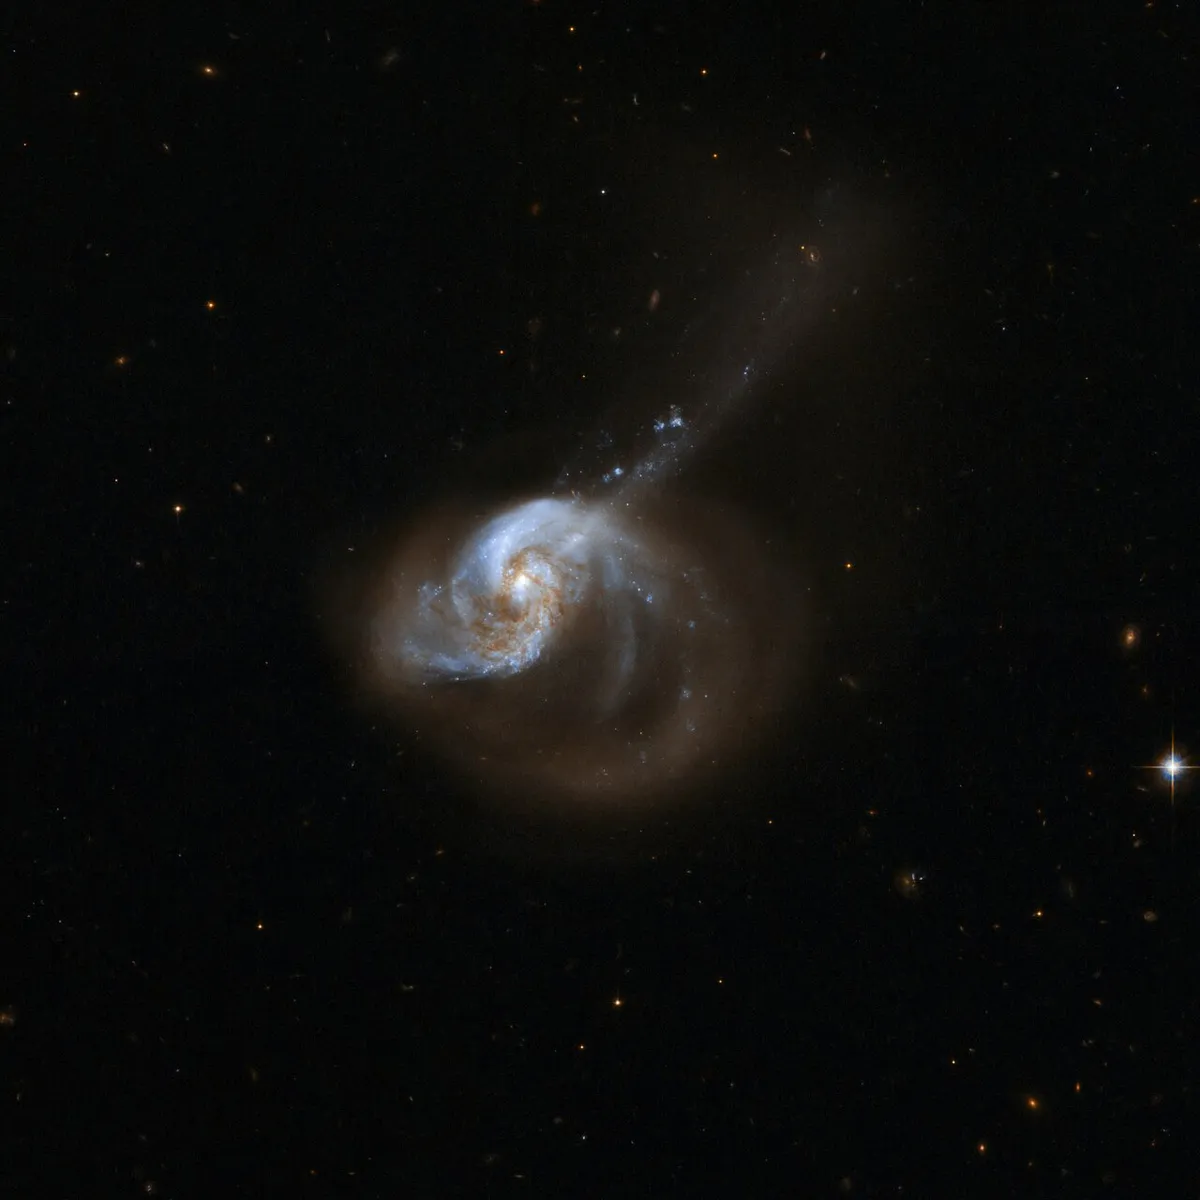 Galaxy system NGC 1614, Note the bright centre and two spiral arms. The asymmetrical structure of the galaxy is probably a result of tidal interactions between two galaxies that merged to produce the object seen here. Credit: NASA, ESA, the Hubble Heritage Team (STScI/AURA)-ESA/Hubble Collaboration and A. Evans (University of Virginia, Charlottesville/NRAO/Stony Brook University)